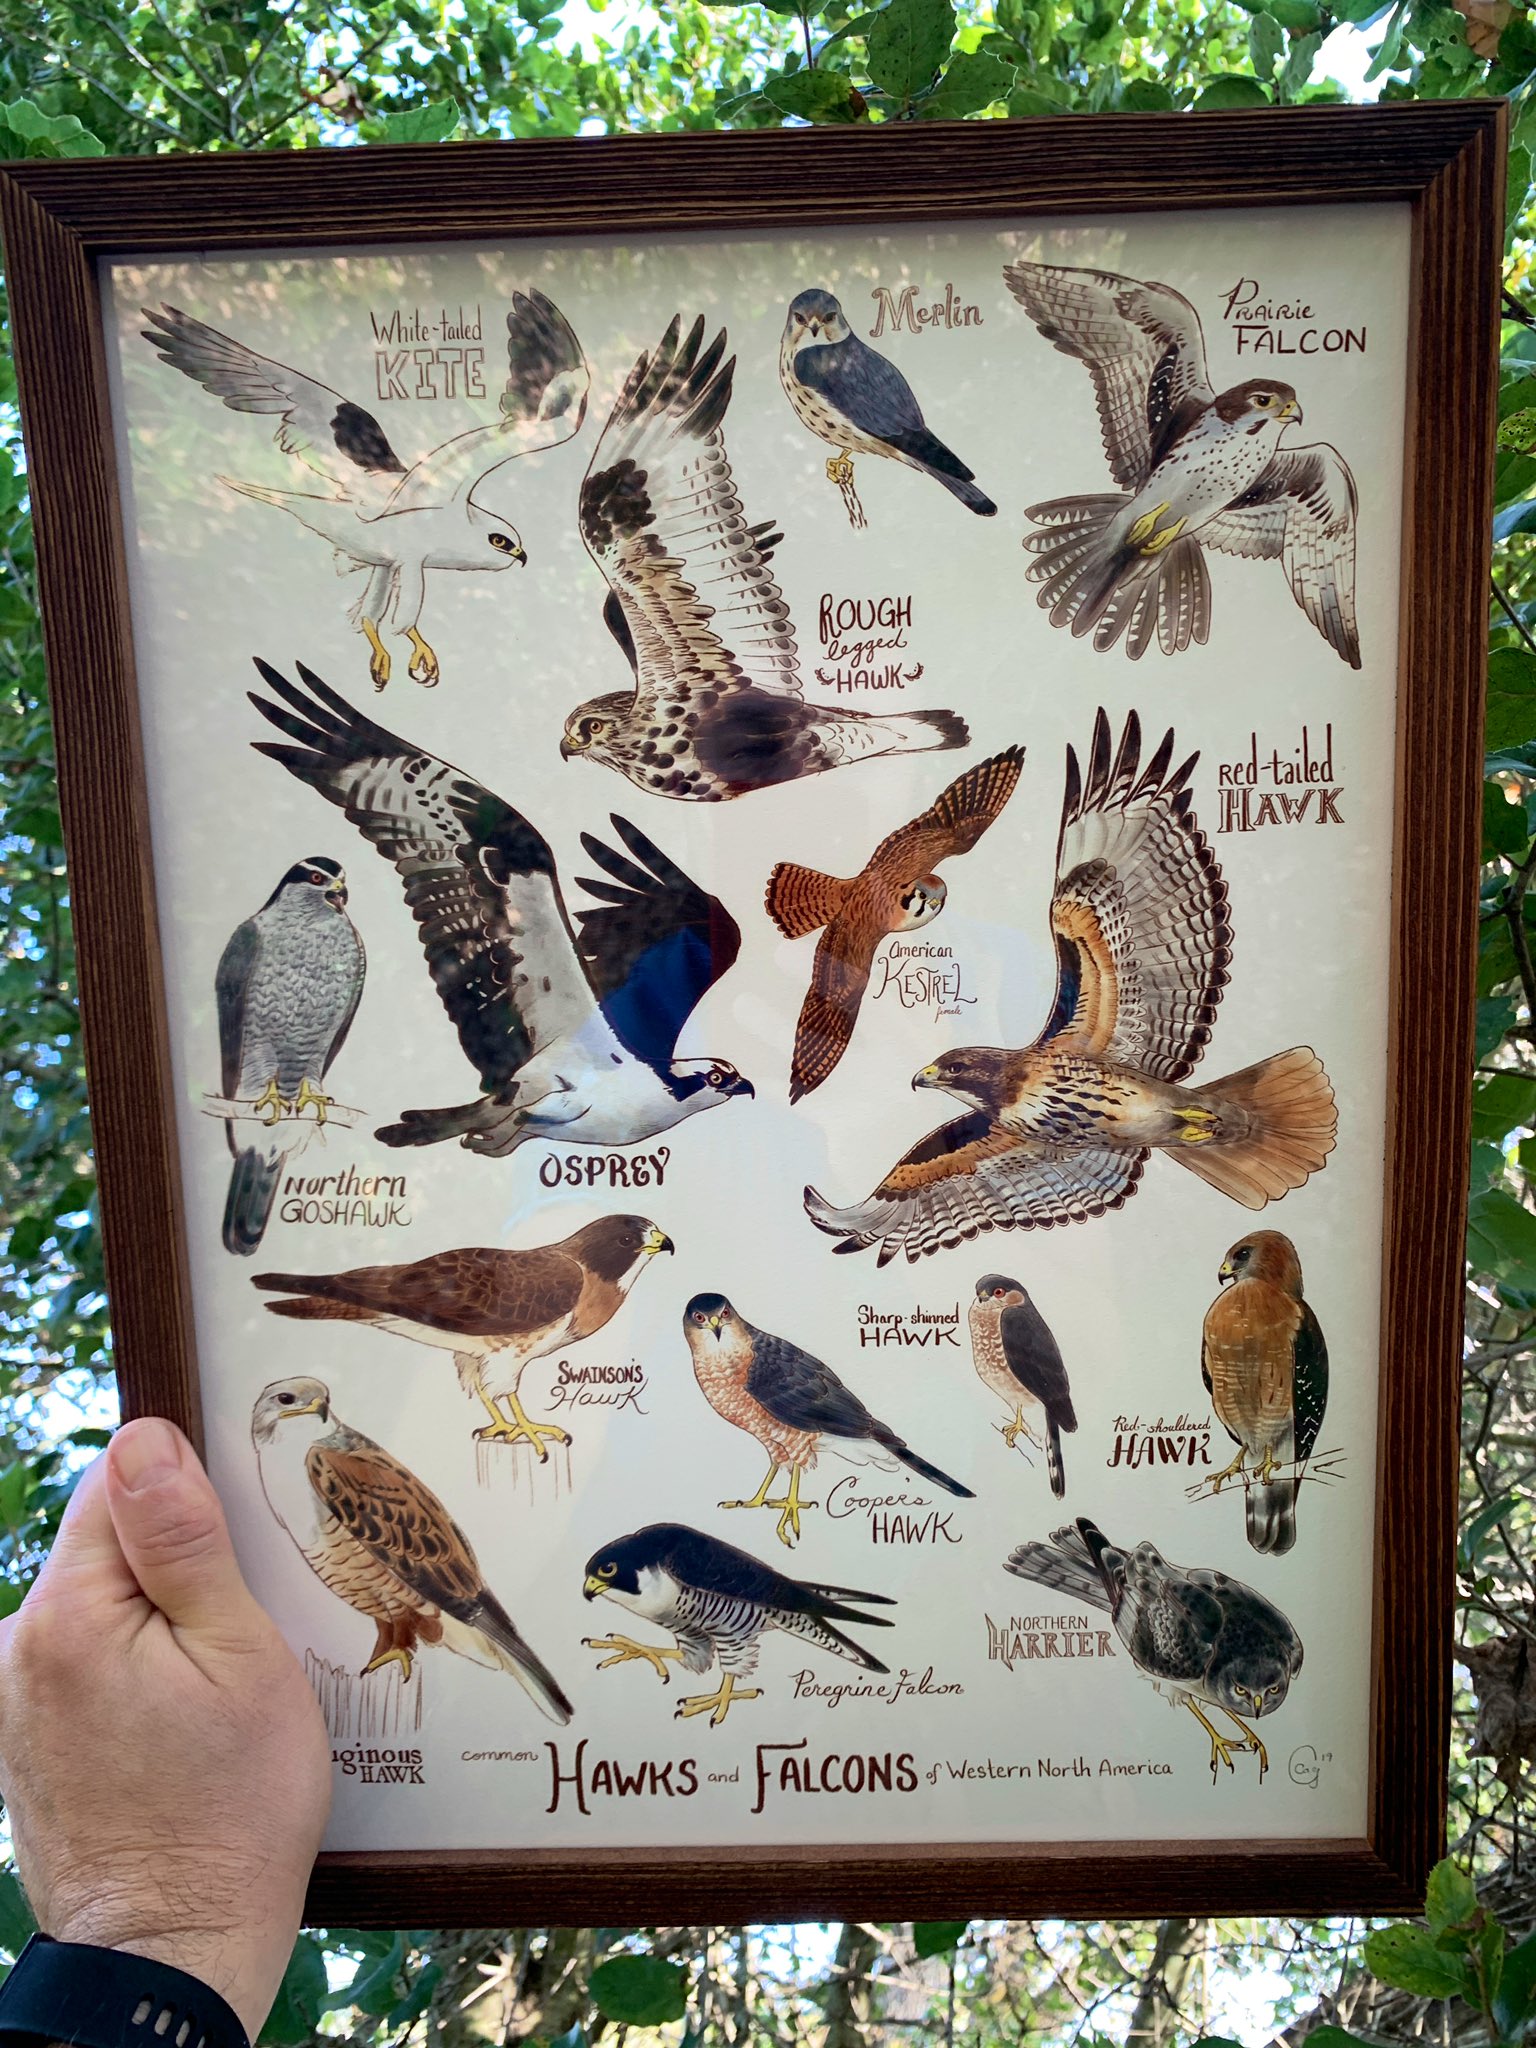 Birds of Prey of North America Giant Poster